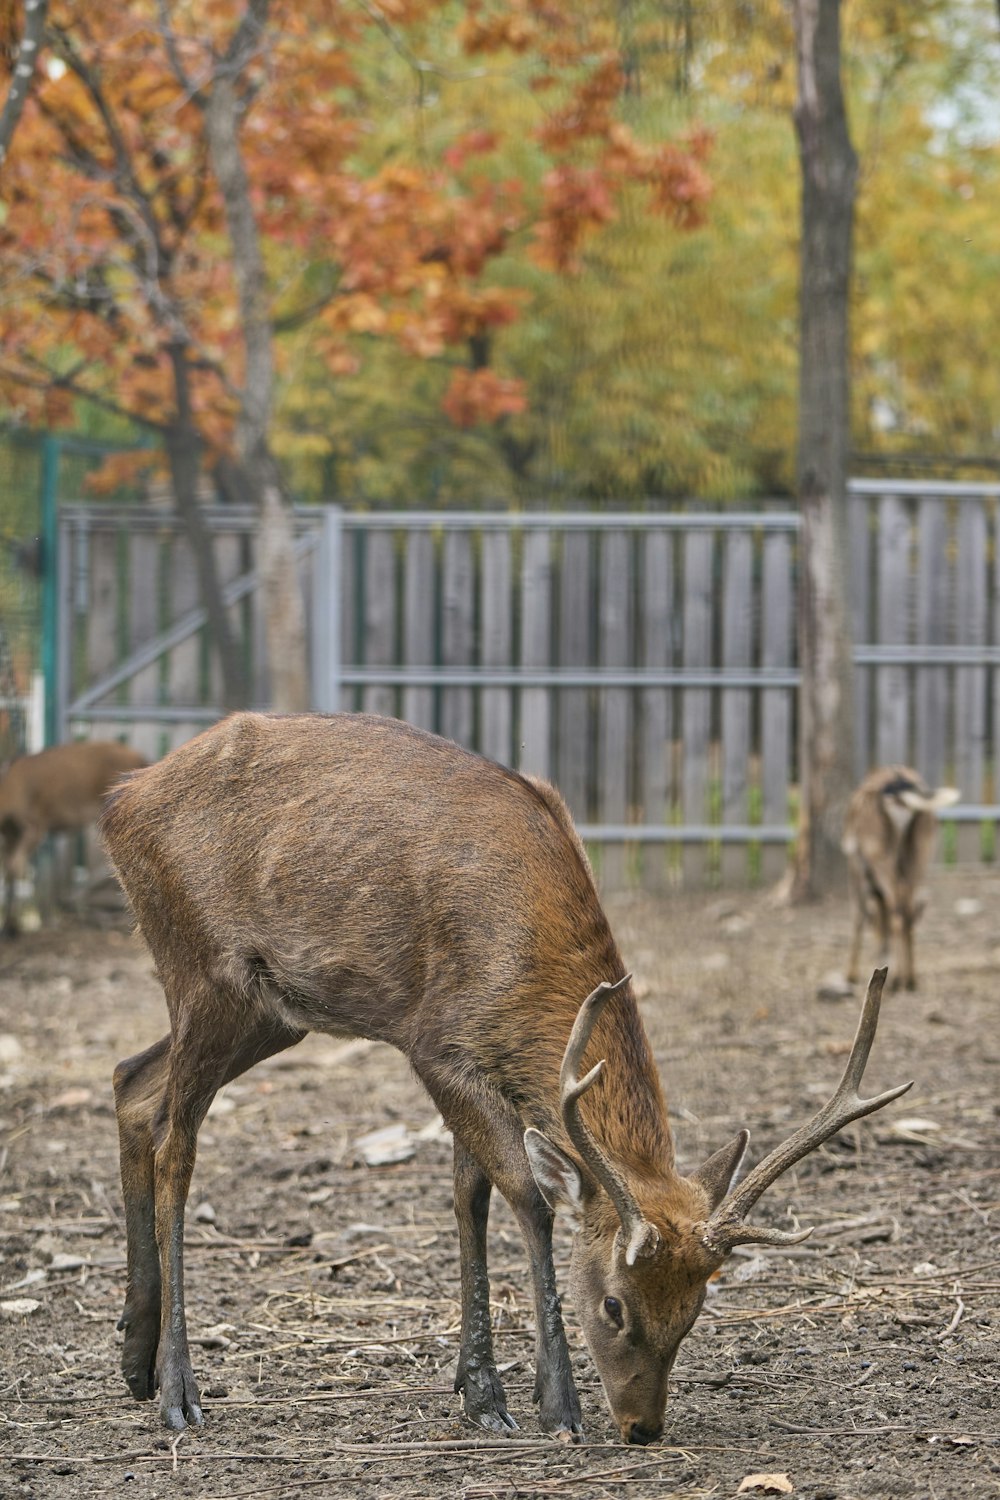 a group of deer in a fenced in area